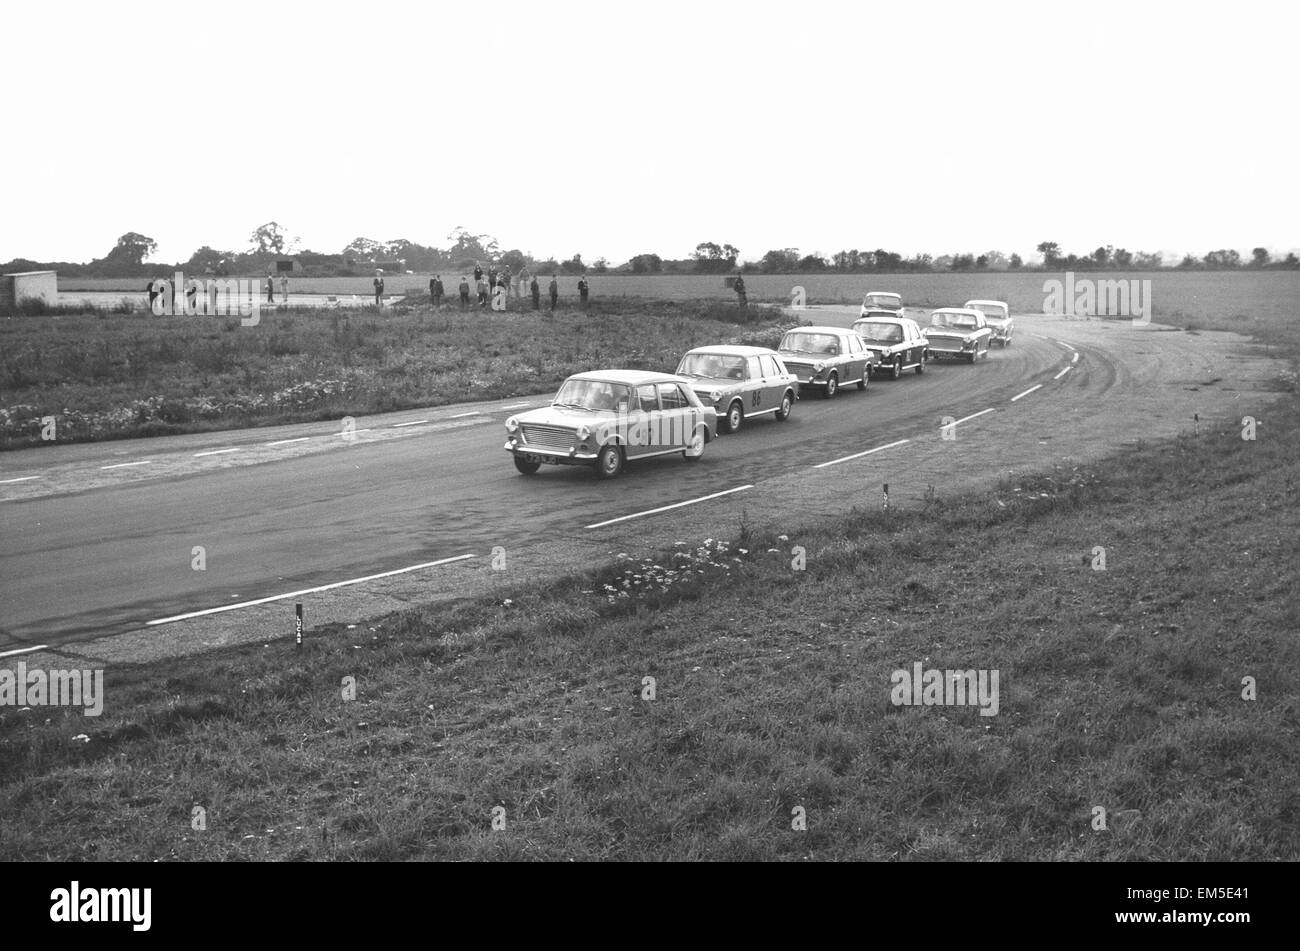 Mike Parkes No 87 leads the competitors in the Molyslip Morris 1100 race at Snetterton race track in Norfolk. September 29th 1963 Stock Photo